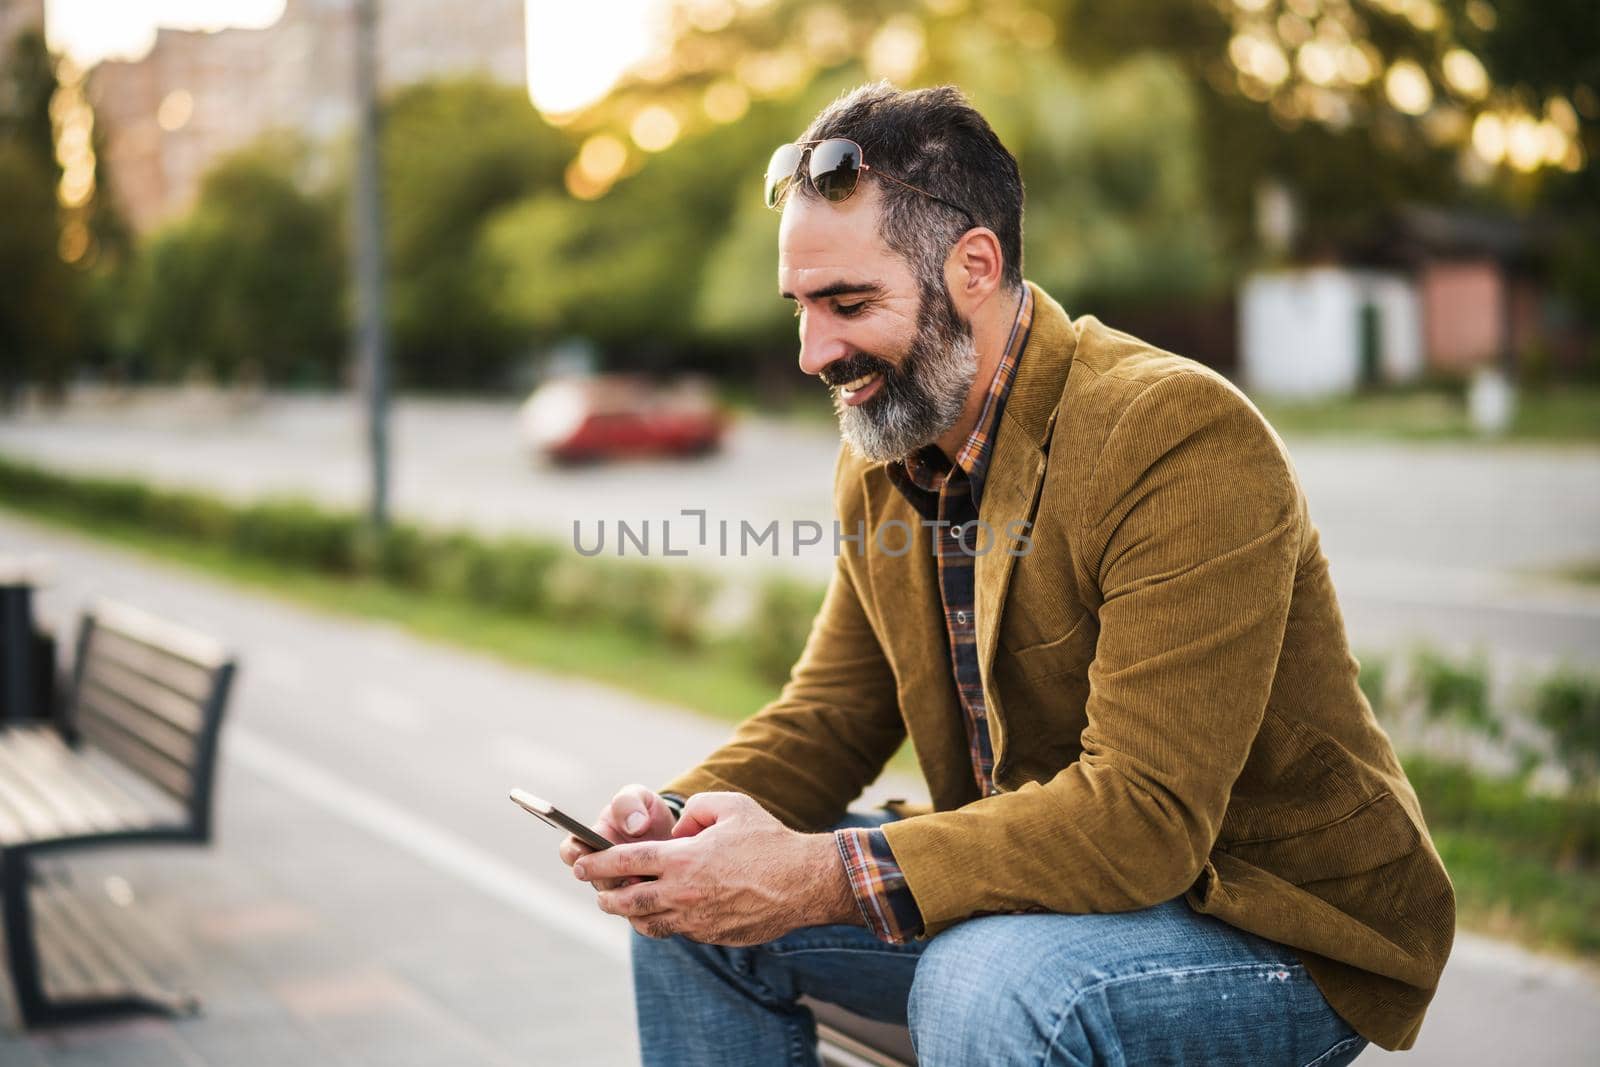 Modern businessman with beard using mobile phone while sitting on the bench in the city street.